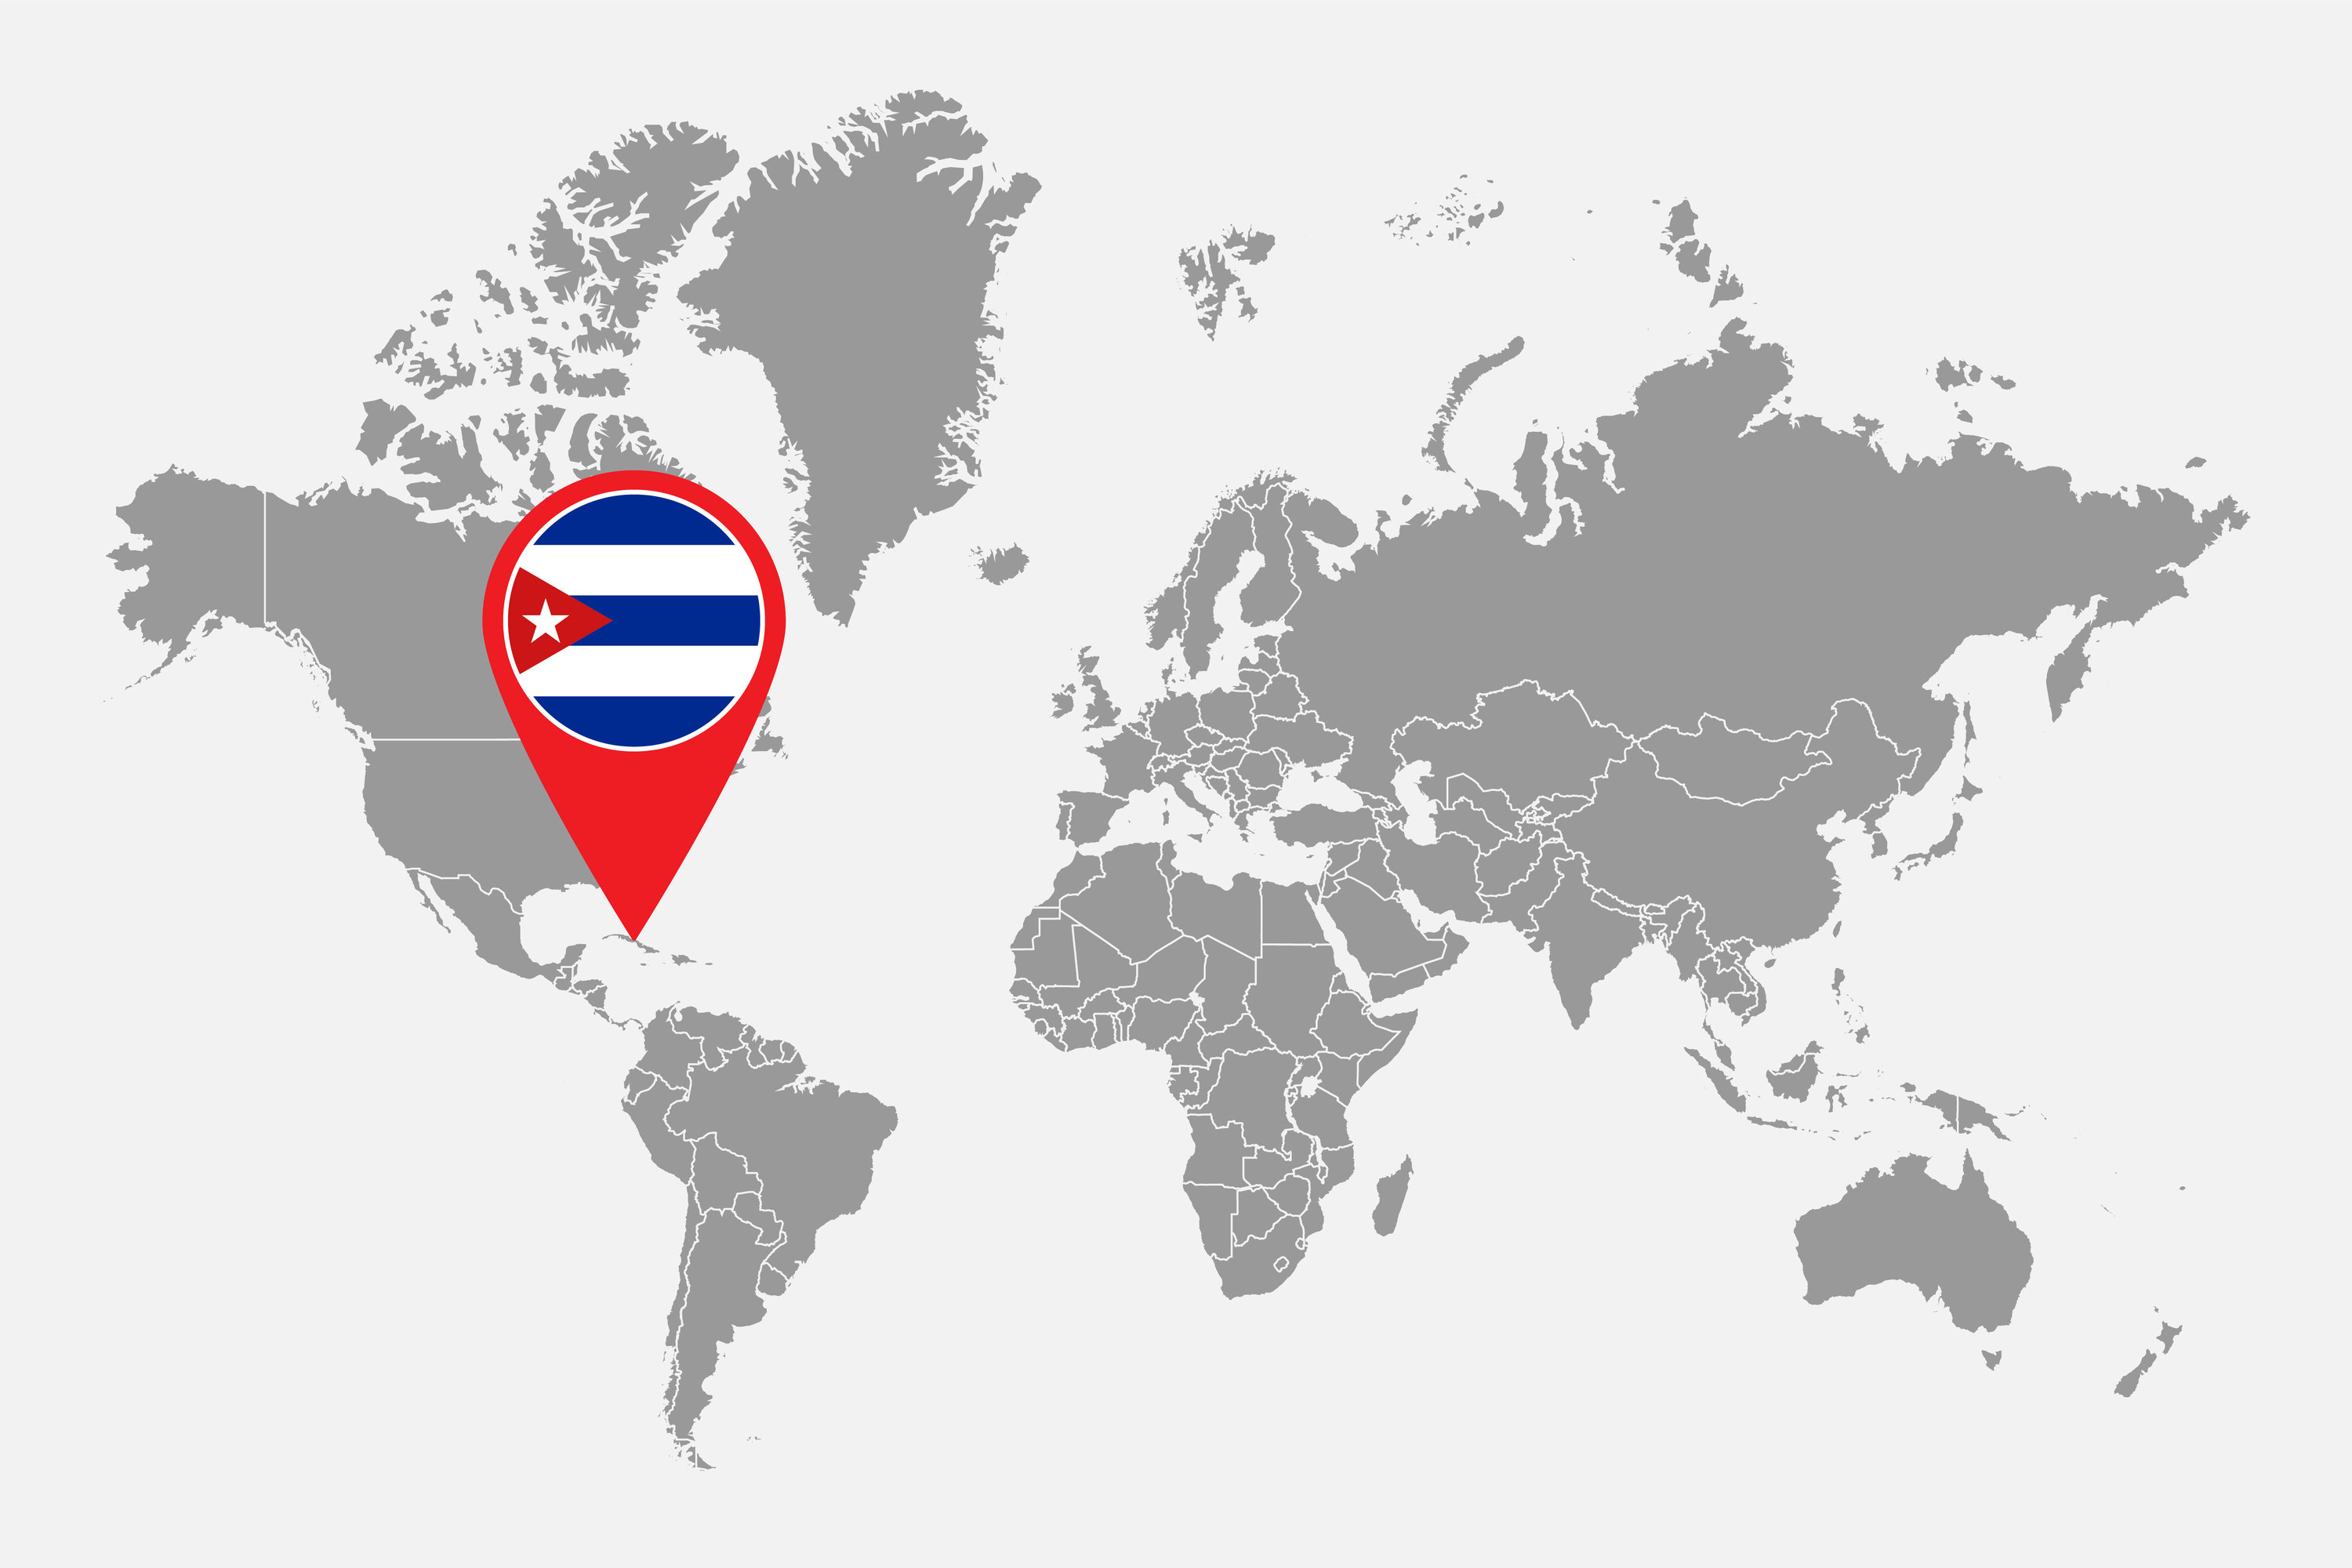 A world map with Cuba indicated